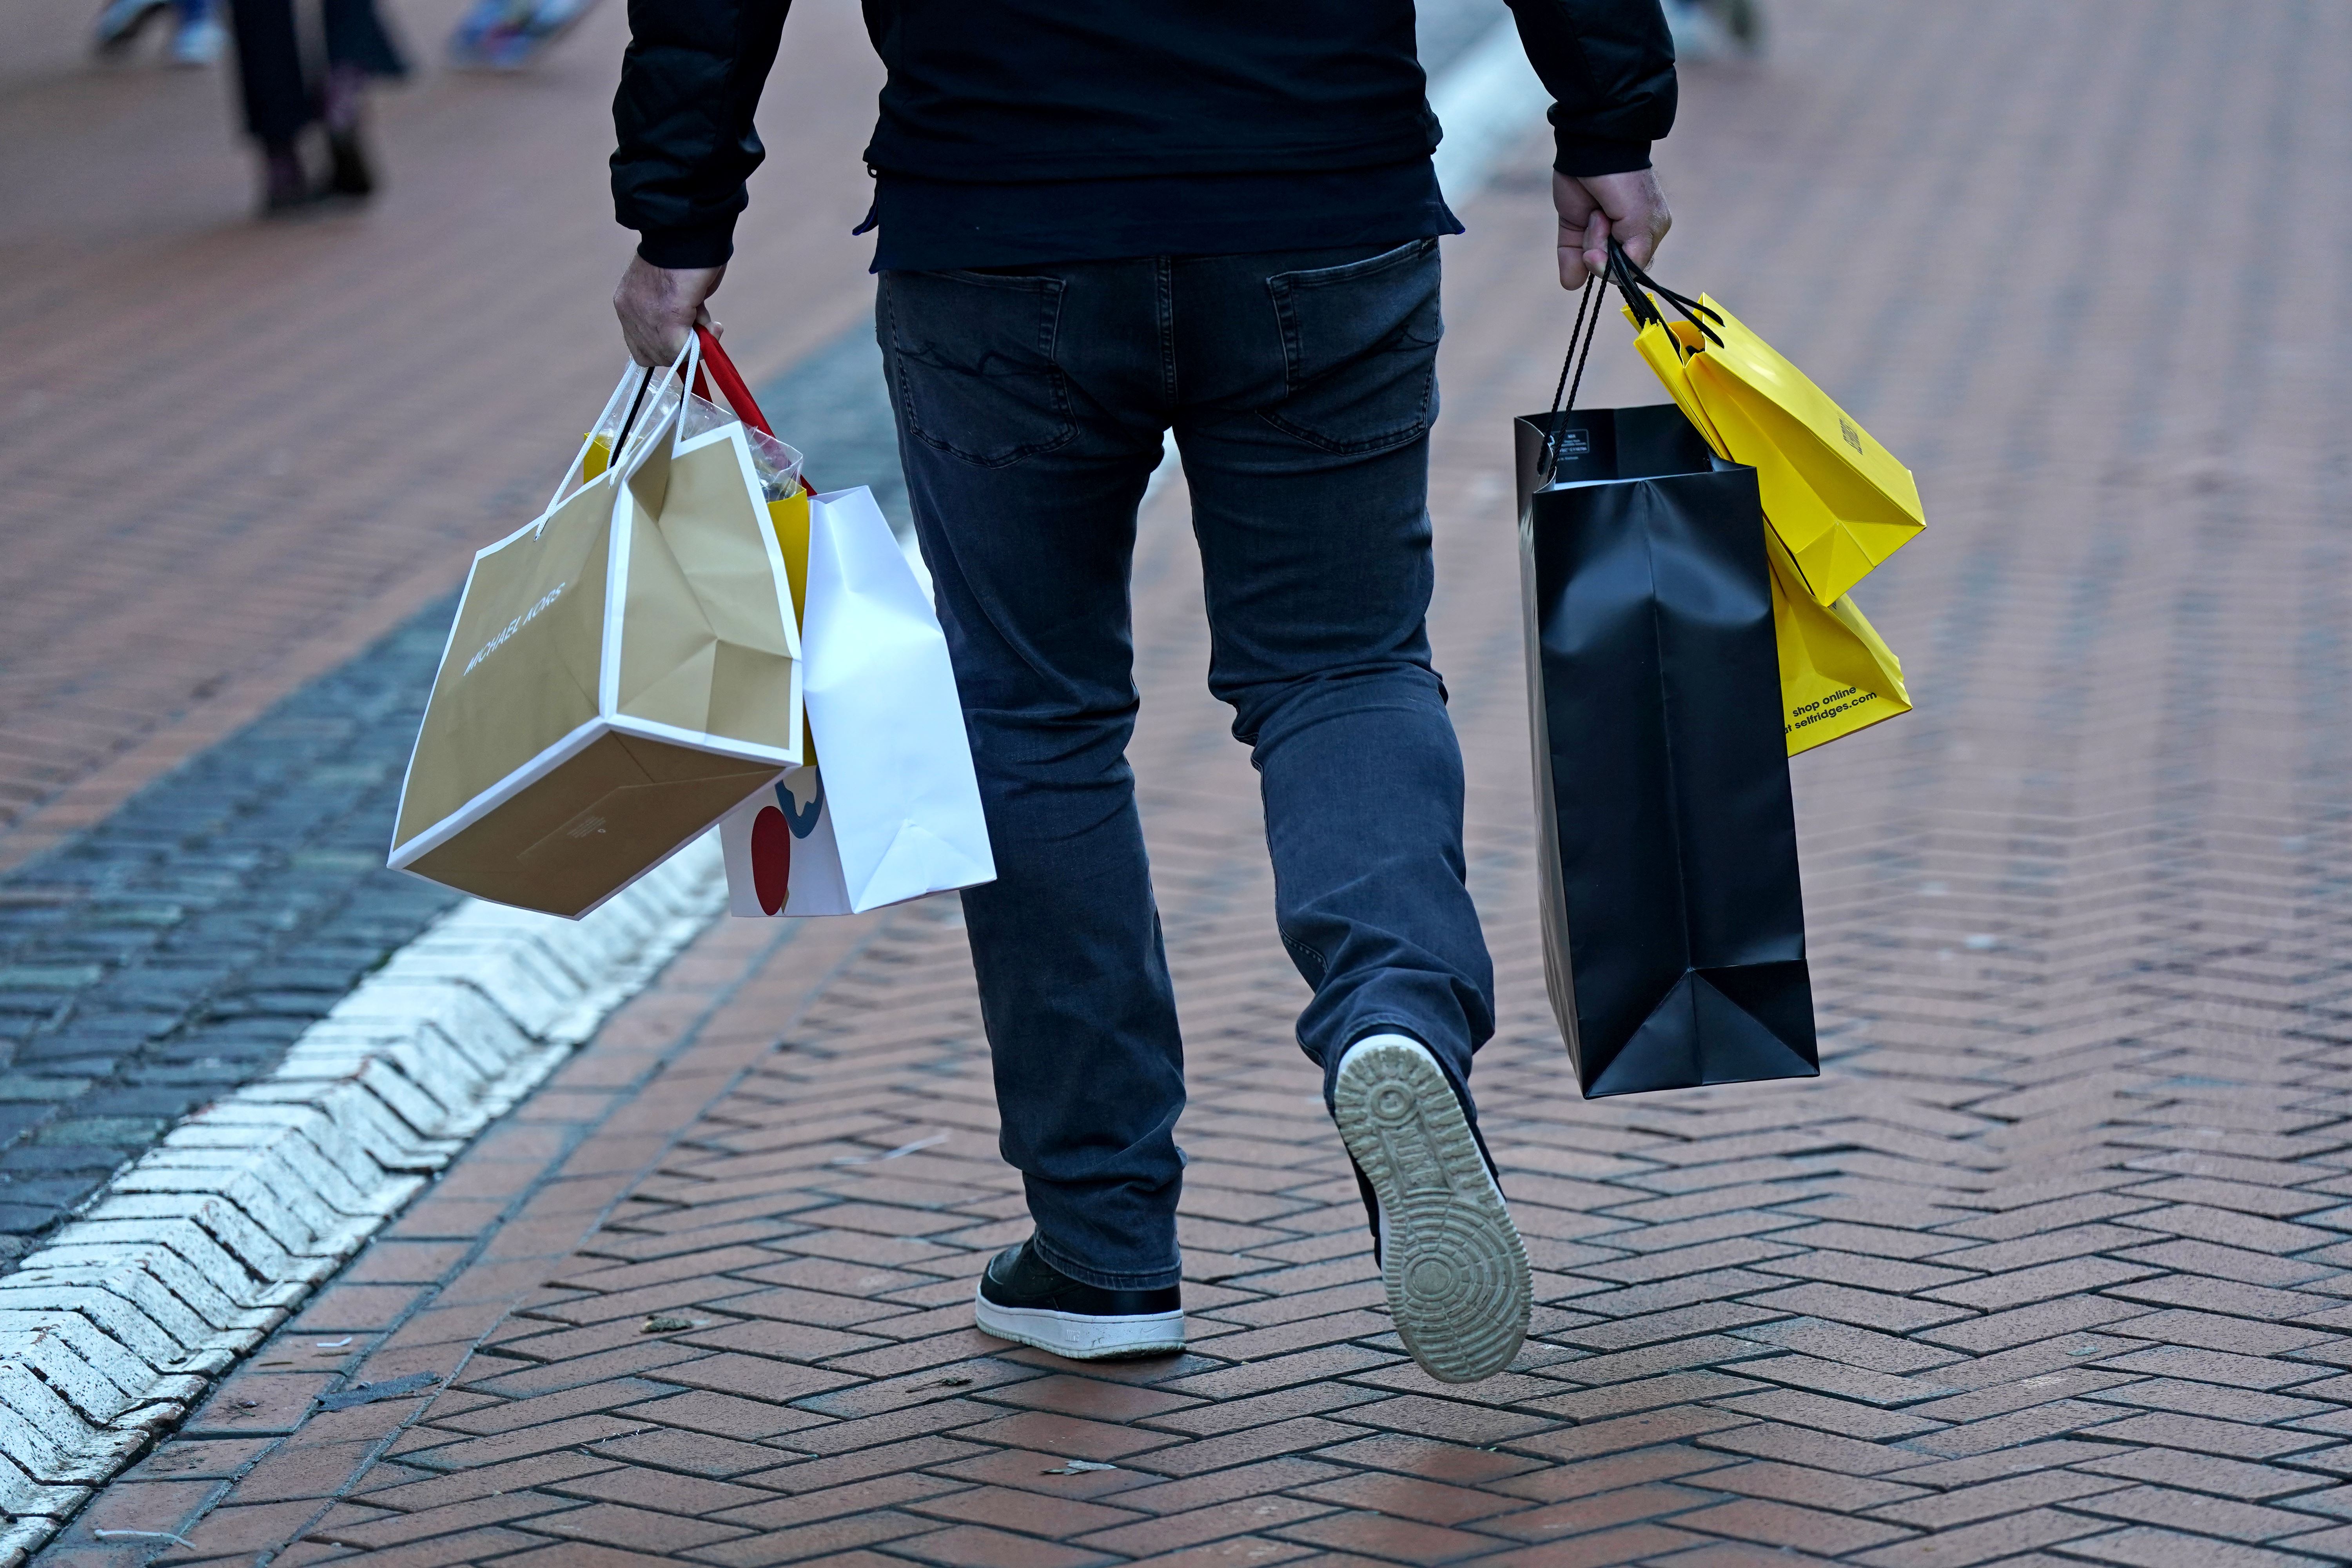 Fashion and furniture shopping help UK retail sales rebound in May